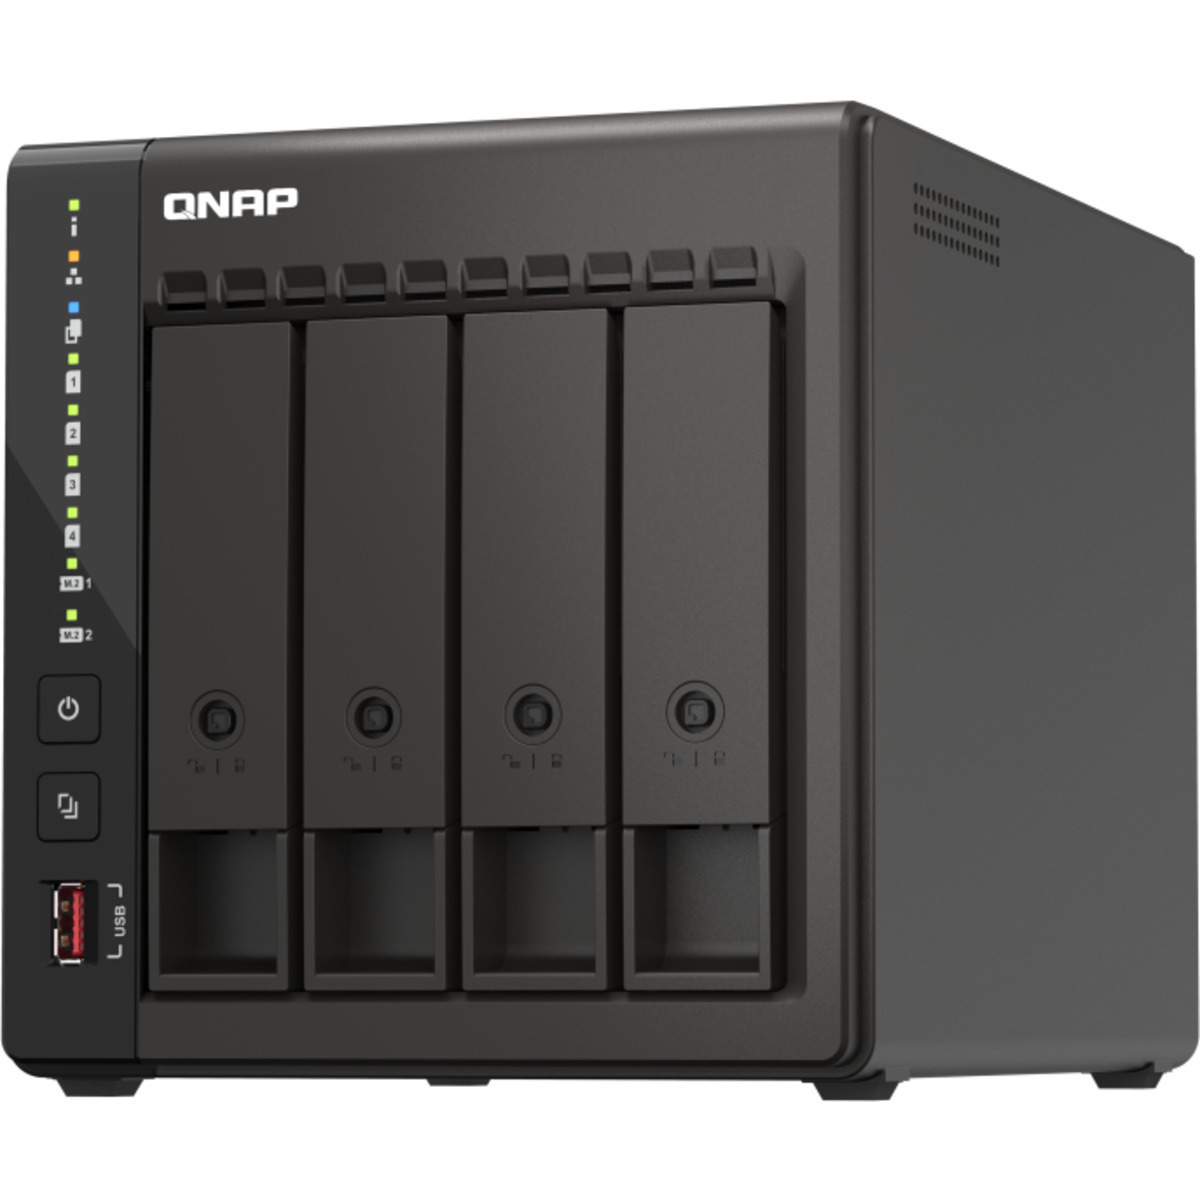 QNAP TS-453E 88tb 4-Bay Desktop Multimedia / Power User / Business NAS - Network Attached Storage Device 4x22tb Western Digital Ultrastar HC580 SED WUH722422ALE6L1 3.5 7200rpm SATA 6Gb/s HDD ENTERPRISE Class Drives Installed - Burn-In Tested TS-453E